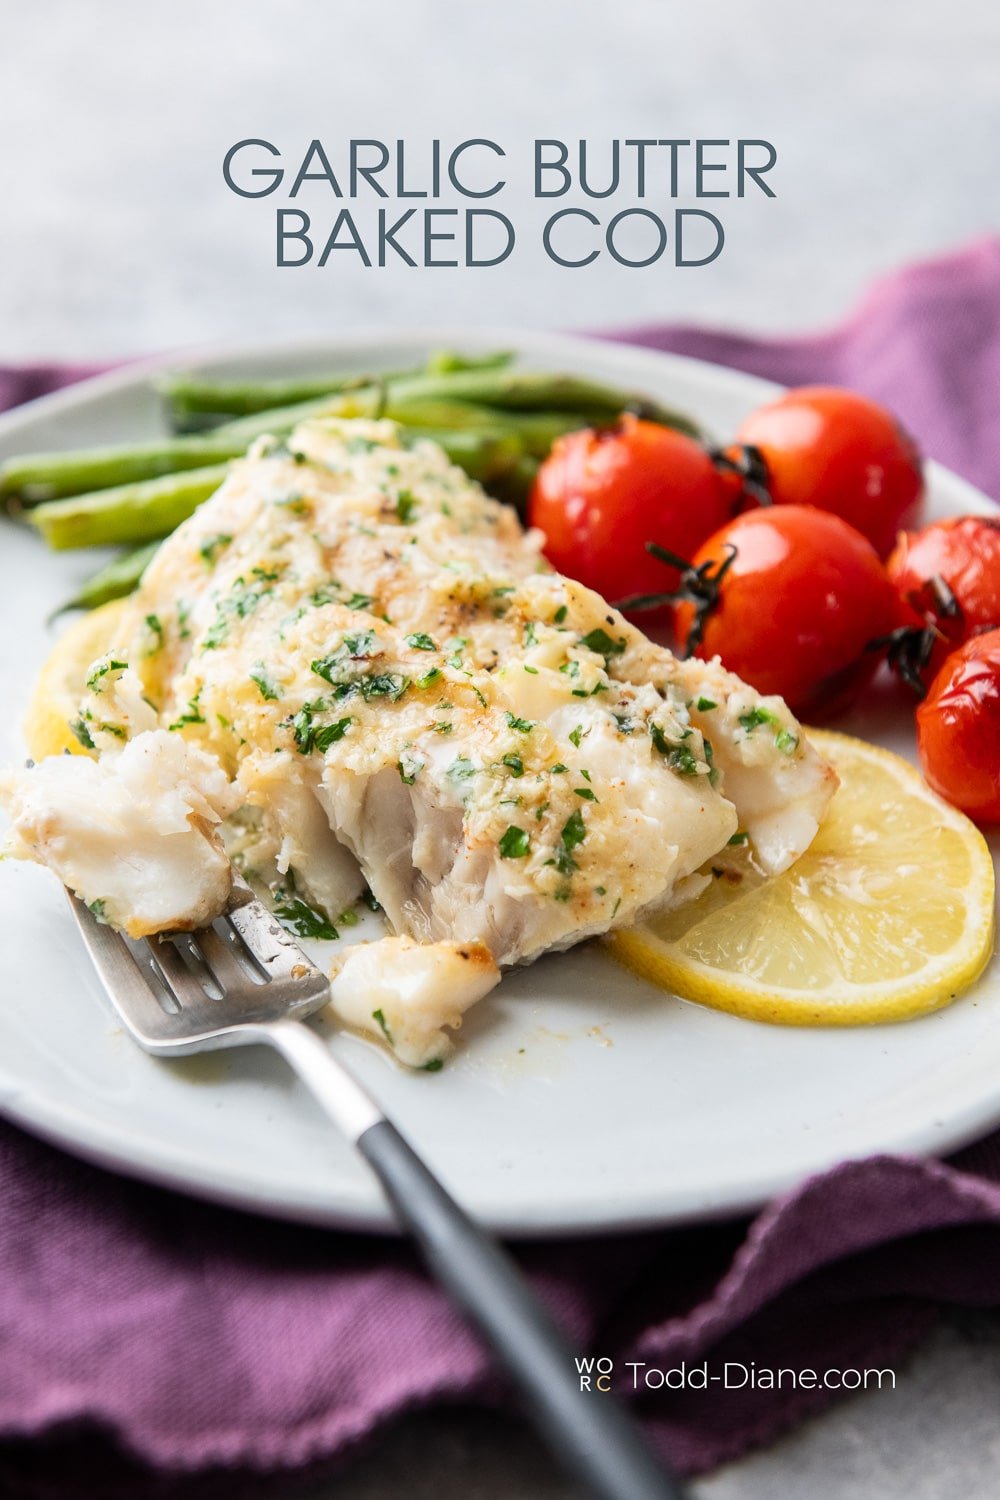 Baked Cod Recipe with Garlic Butter in 20 min | White On Rice